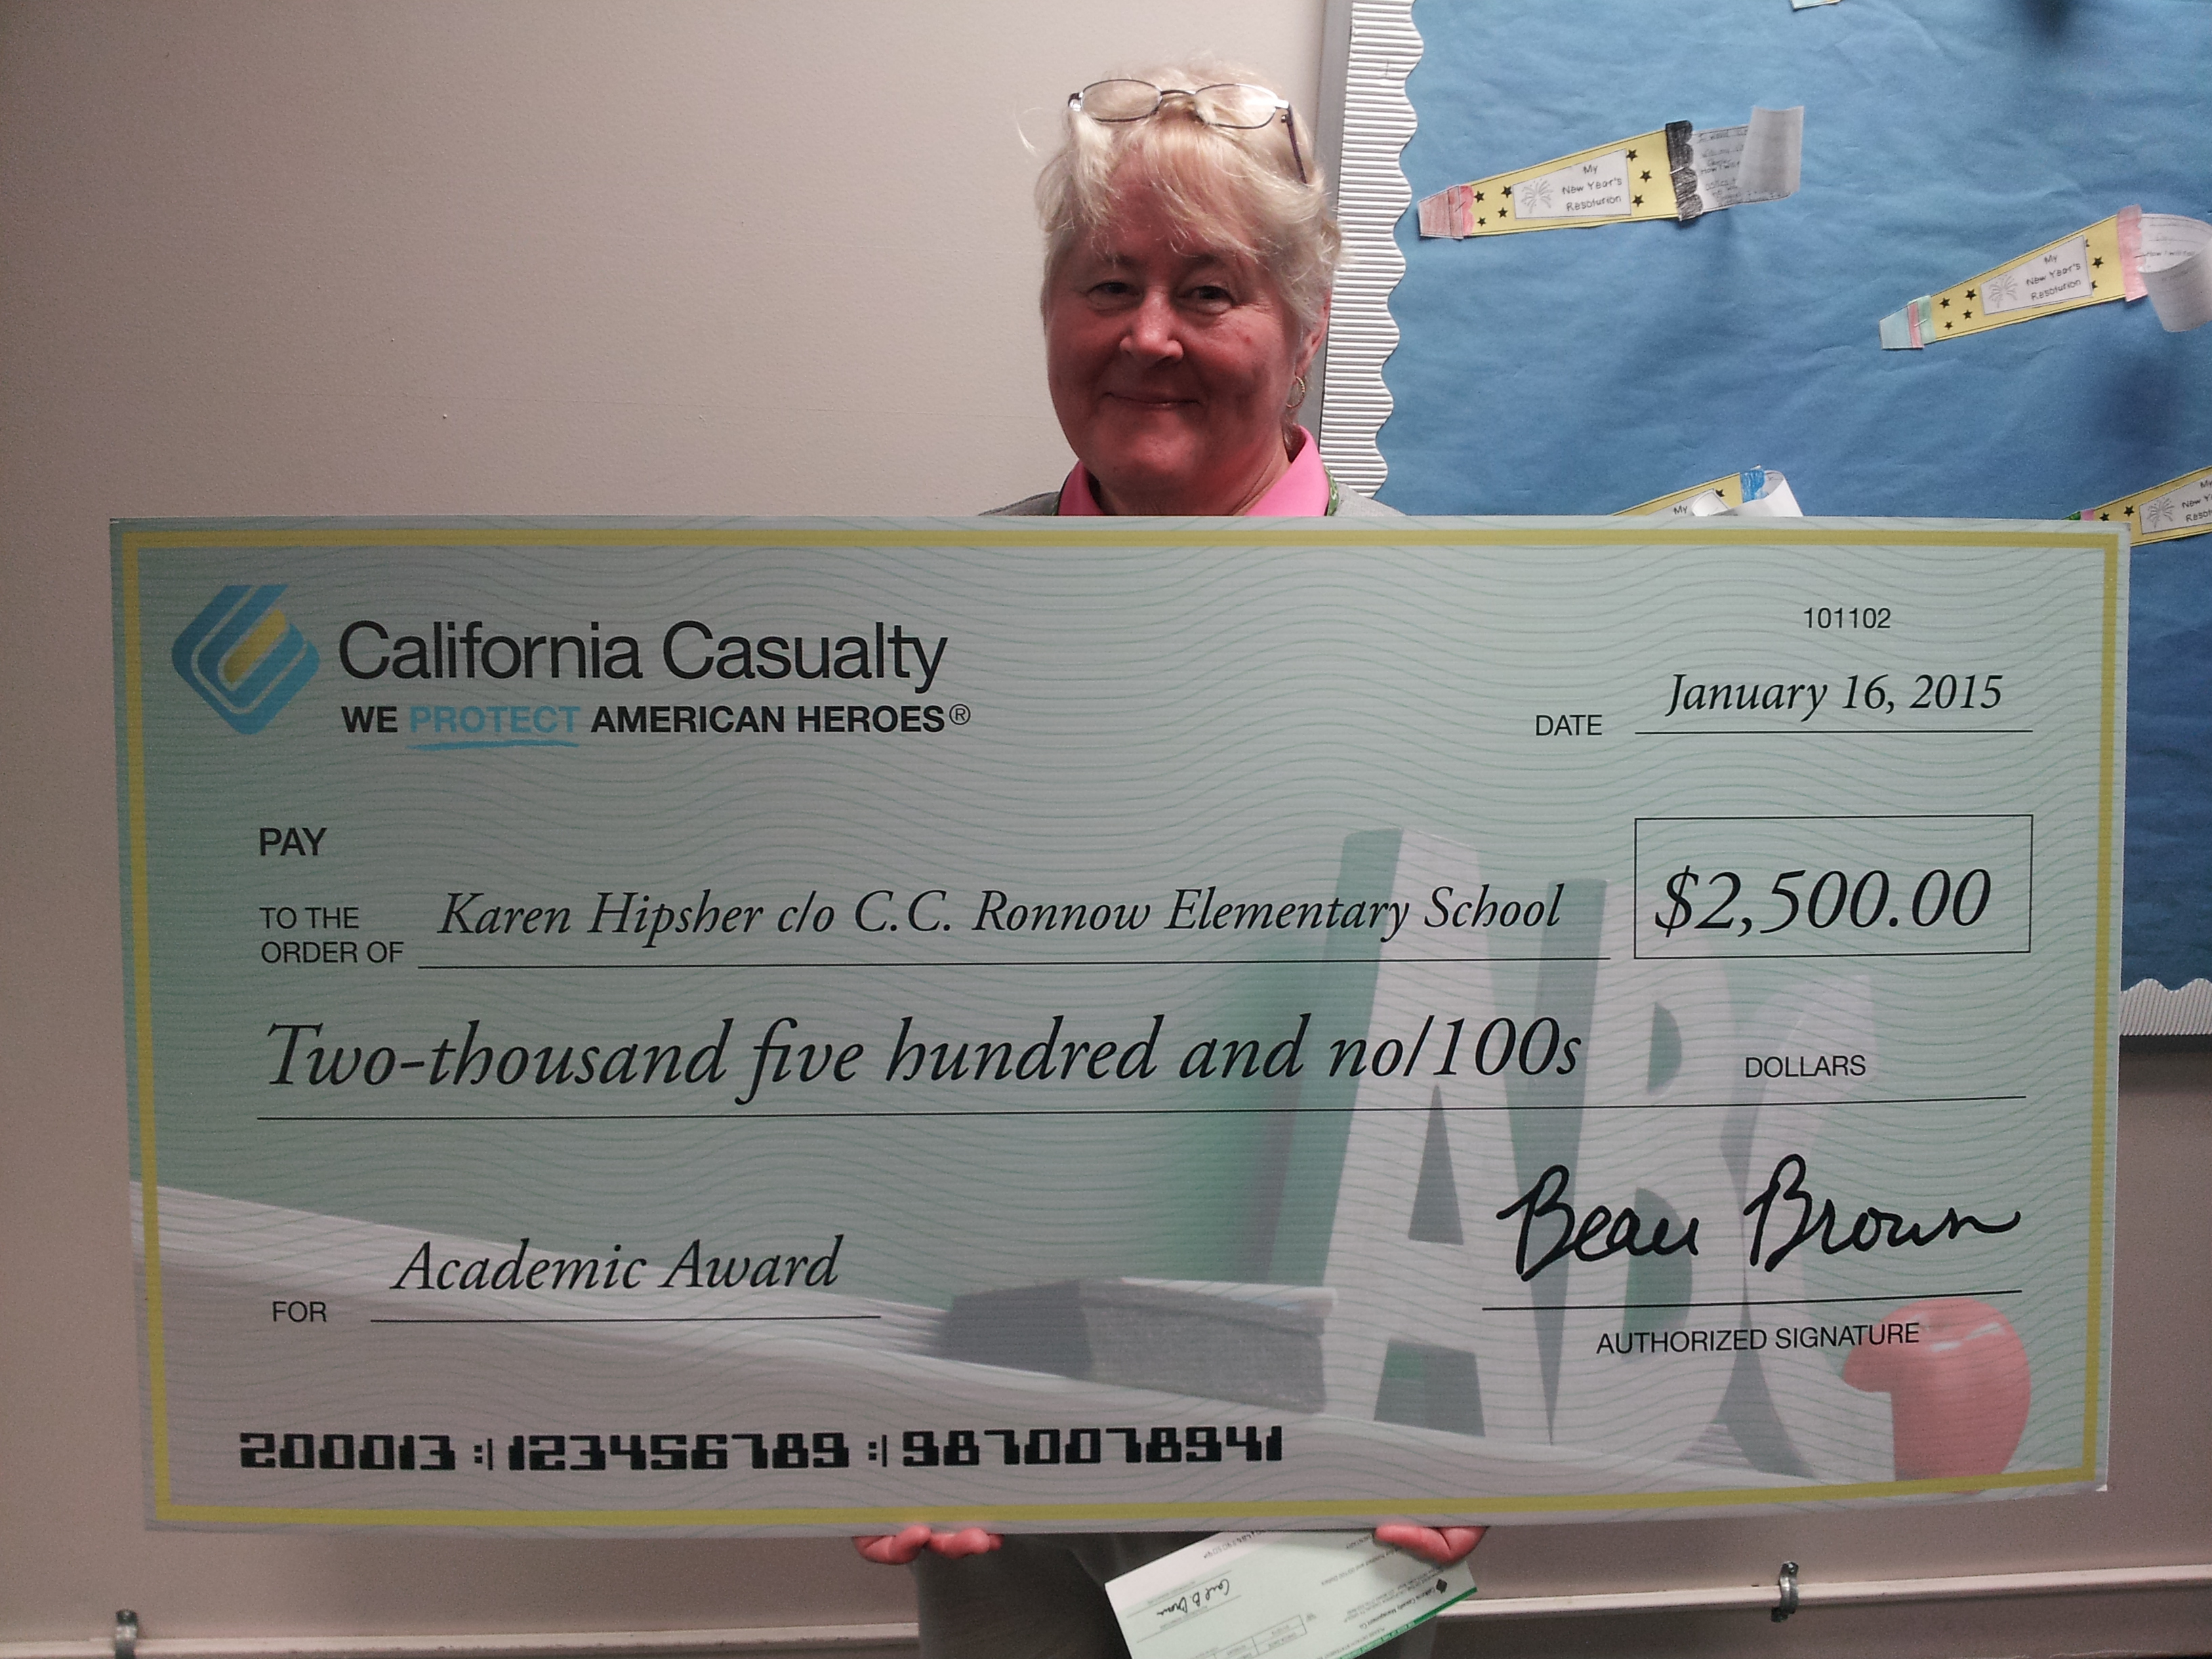 Previous winner Karen Hipsher with her $2,500 Academic Award from California Casualty